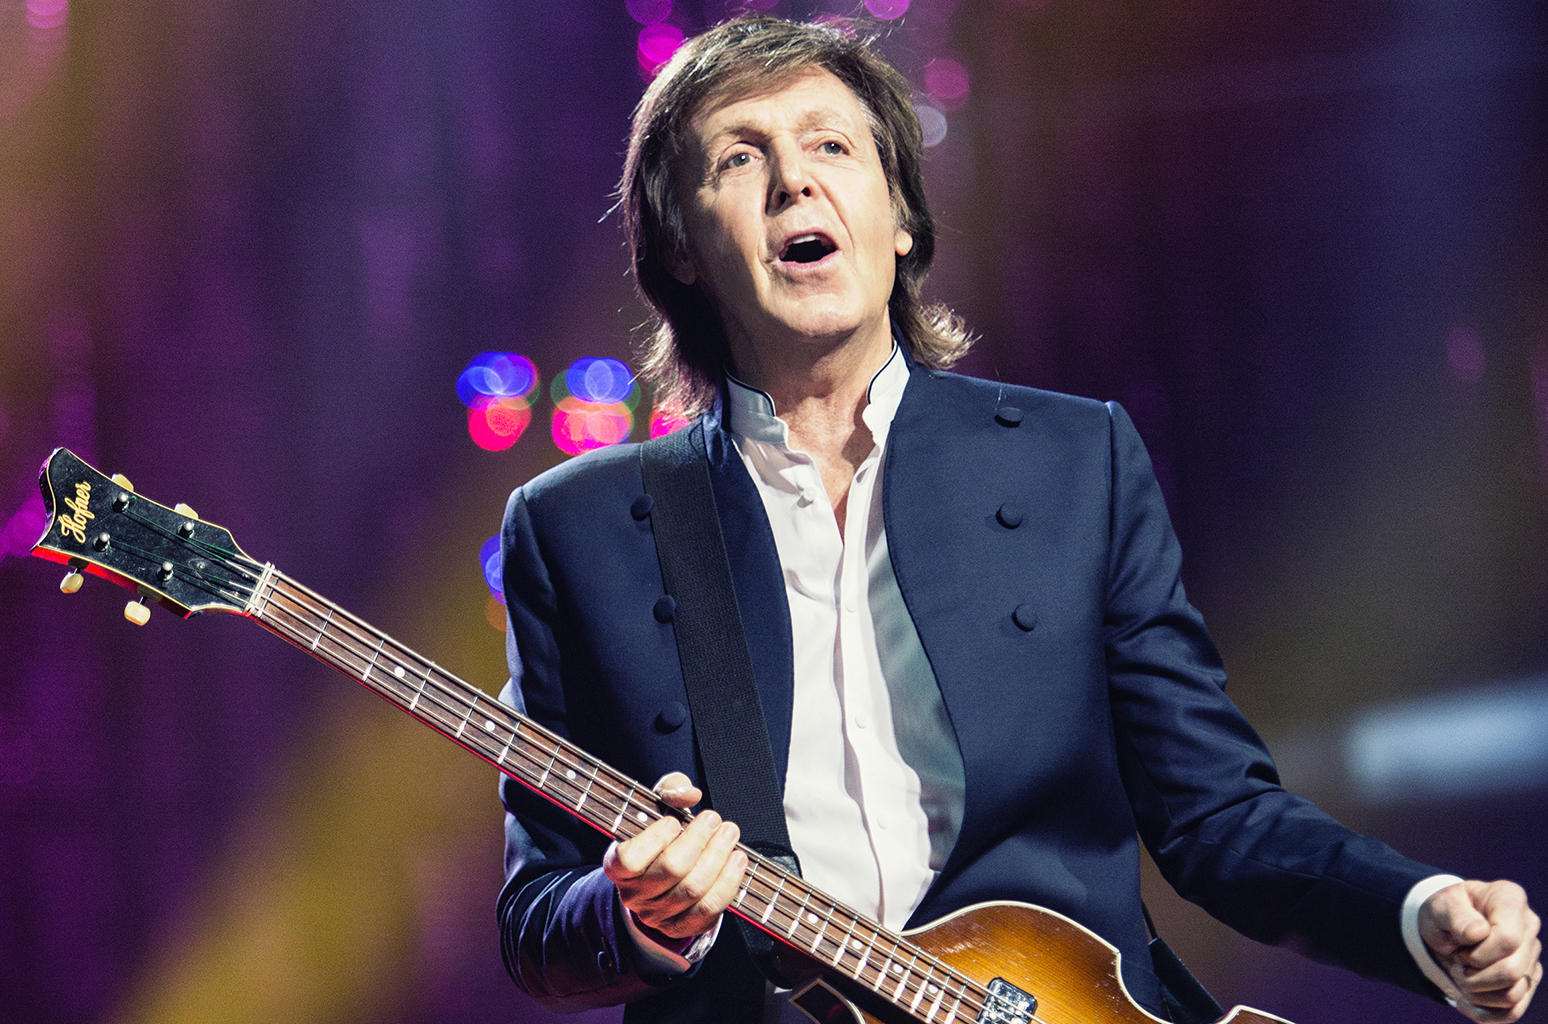 The Hardest General Knowledge True/False Quiz You’ll Take This Year Paul McCartney